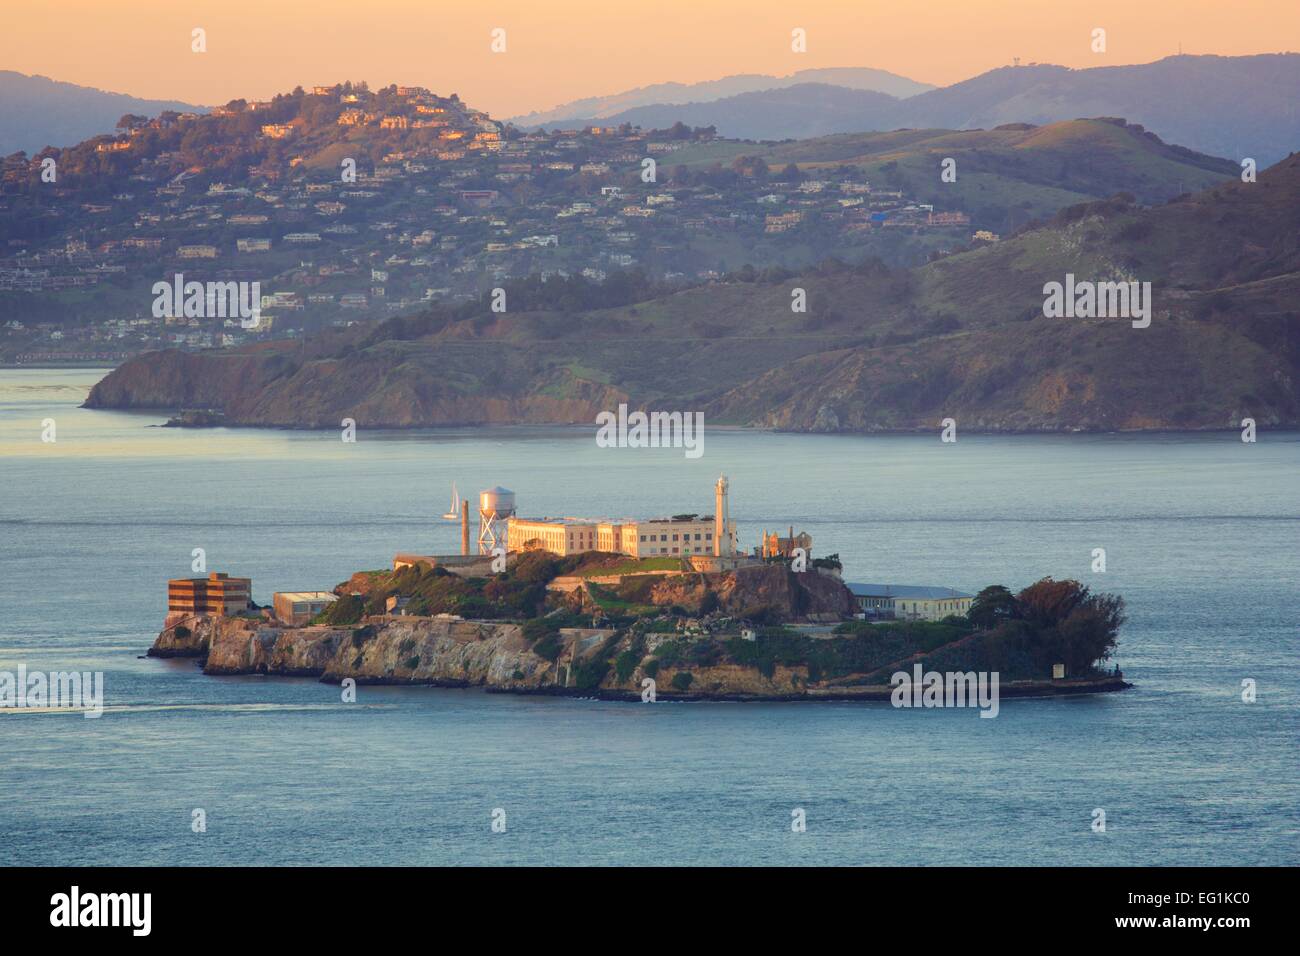 Gorgeous view of Alcatraz in San Francisco Bay at sunset Stock Photo